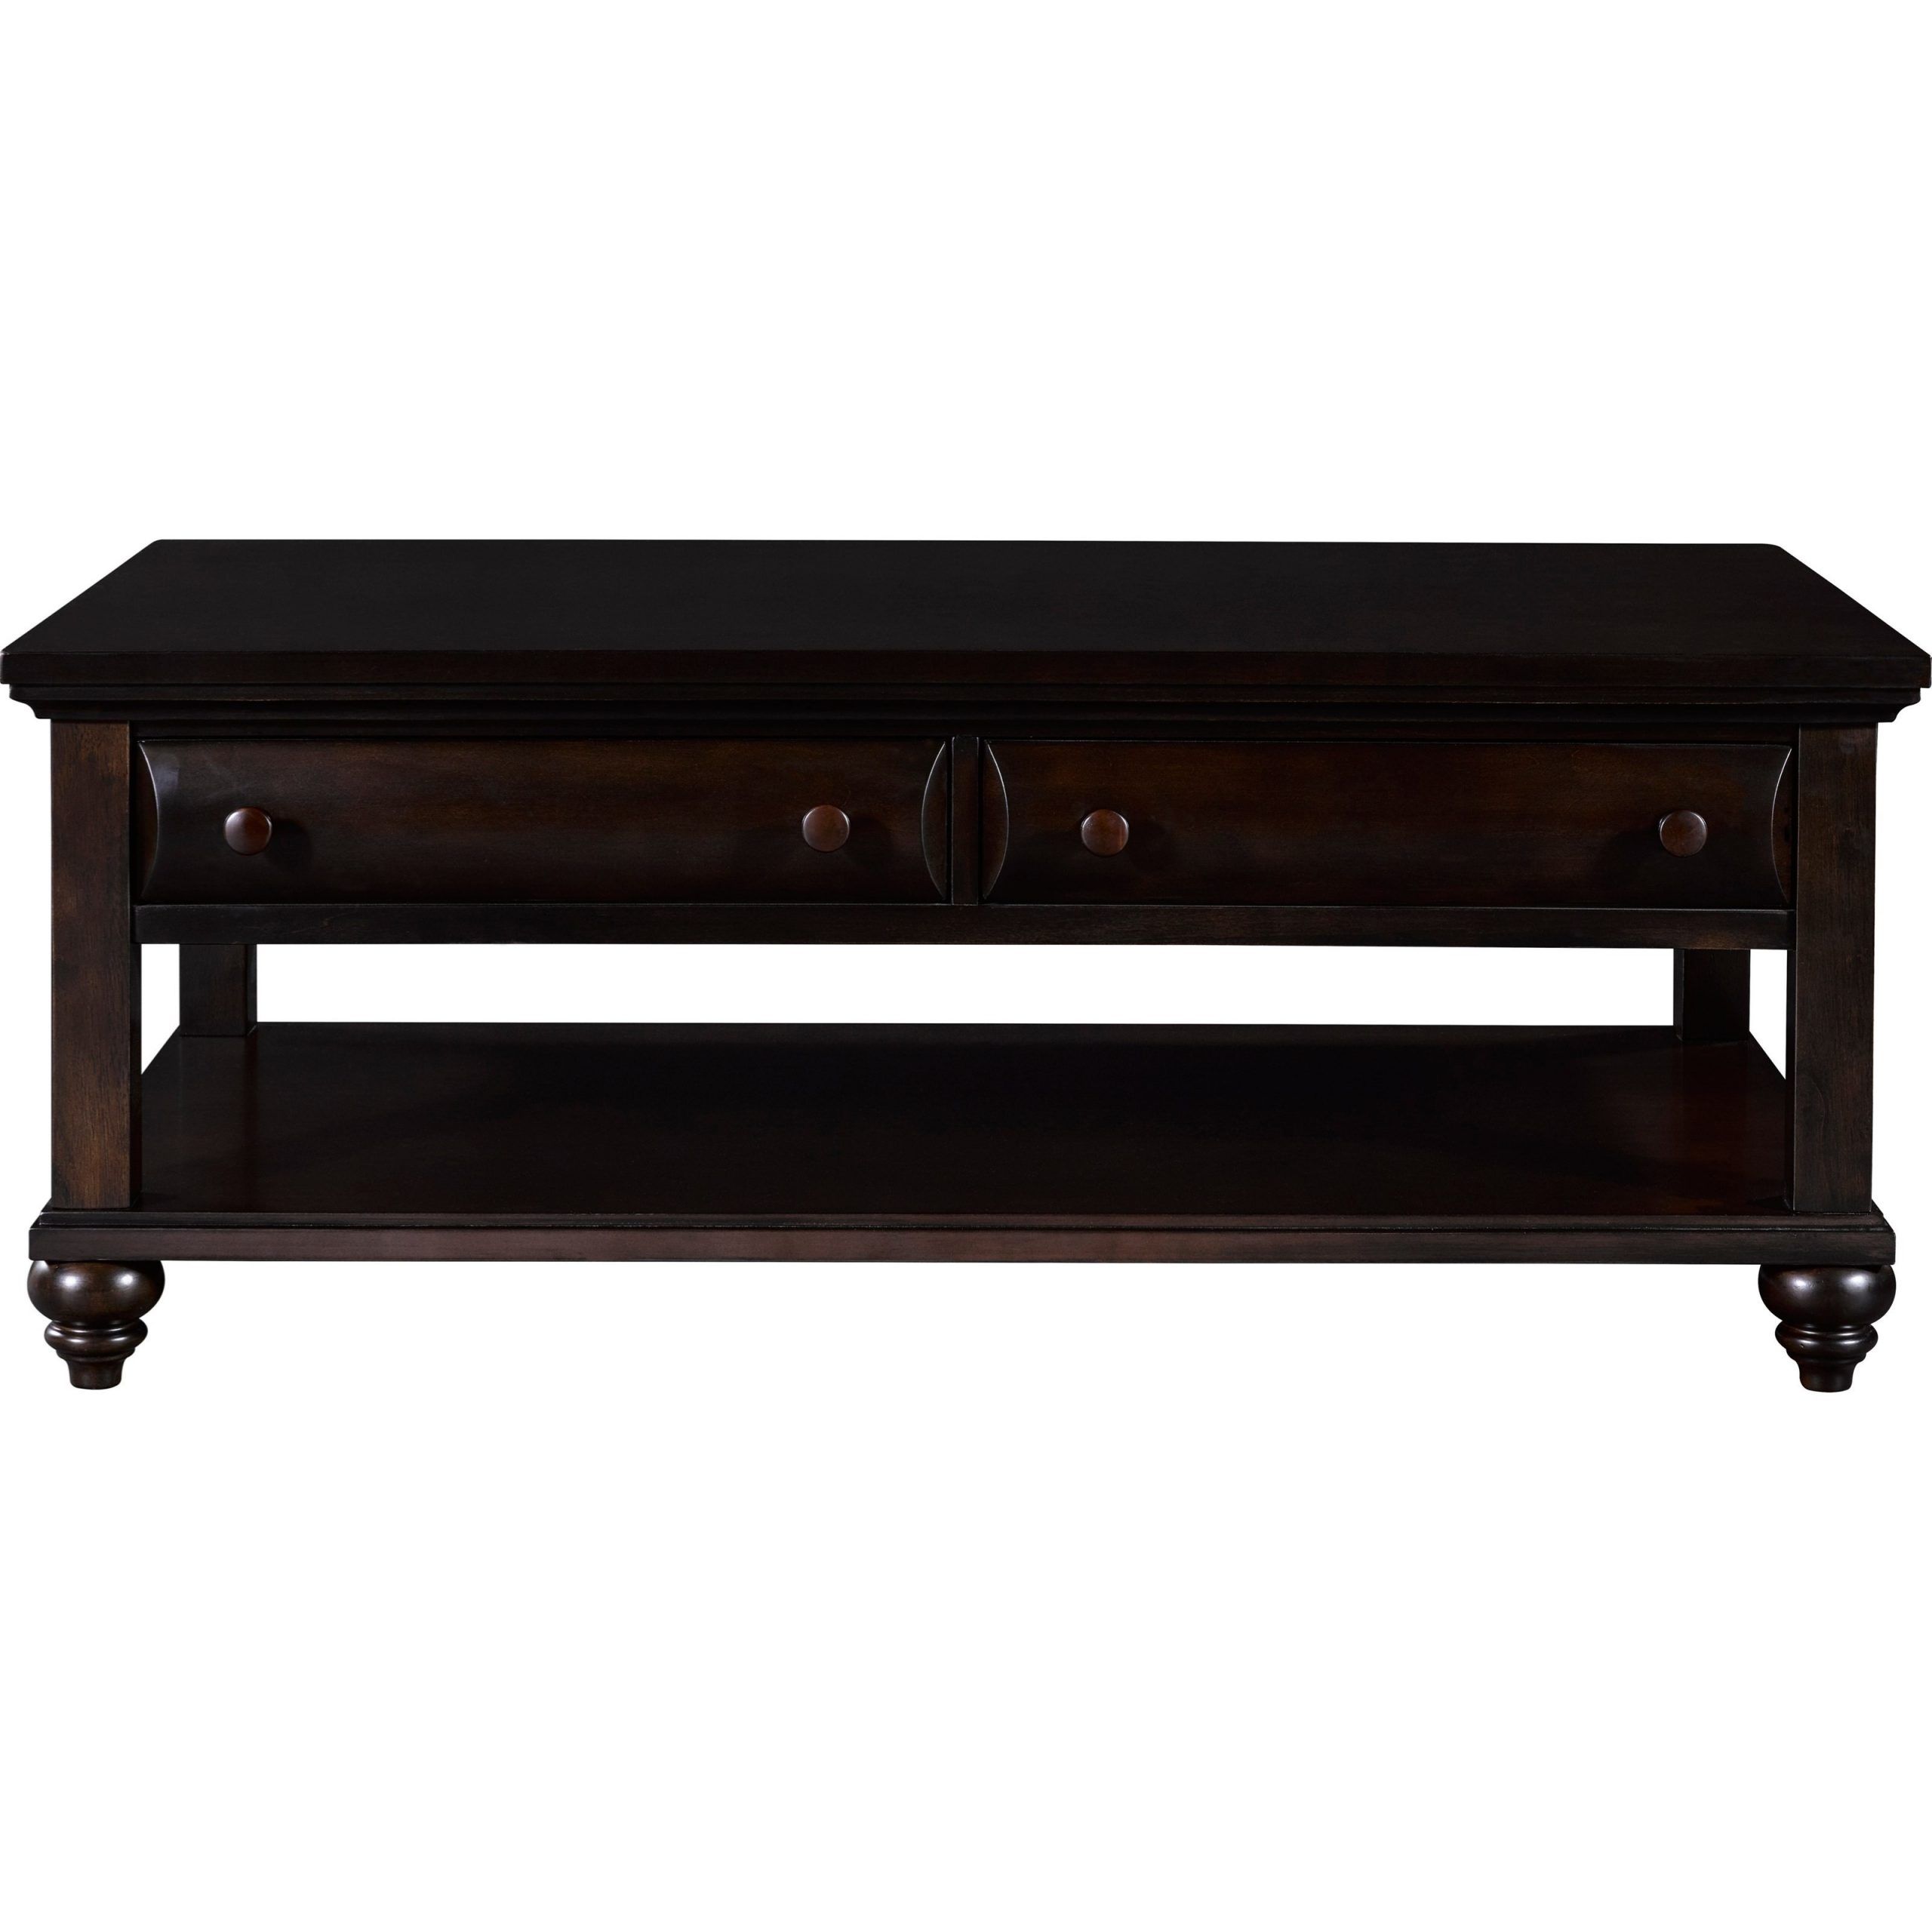 Broyhill Furniture Farnsworth 2 Drawer Cocktail Table In Black Finish In Trendy 2 Drawer Cocktail Tables (View 3 of 10)